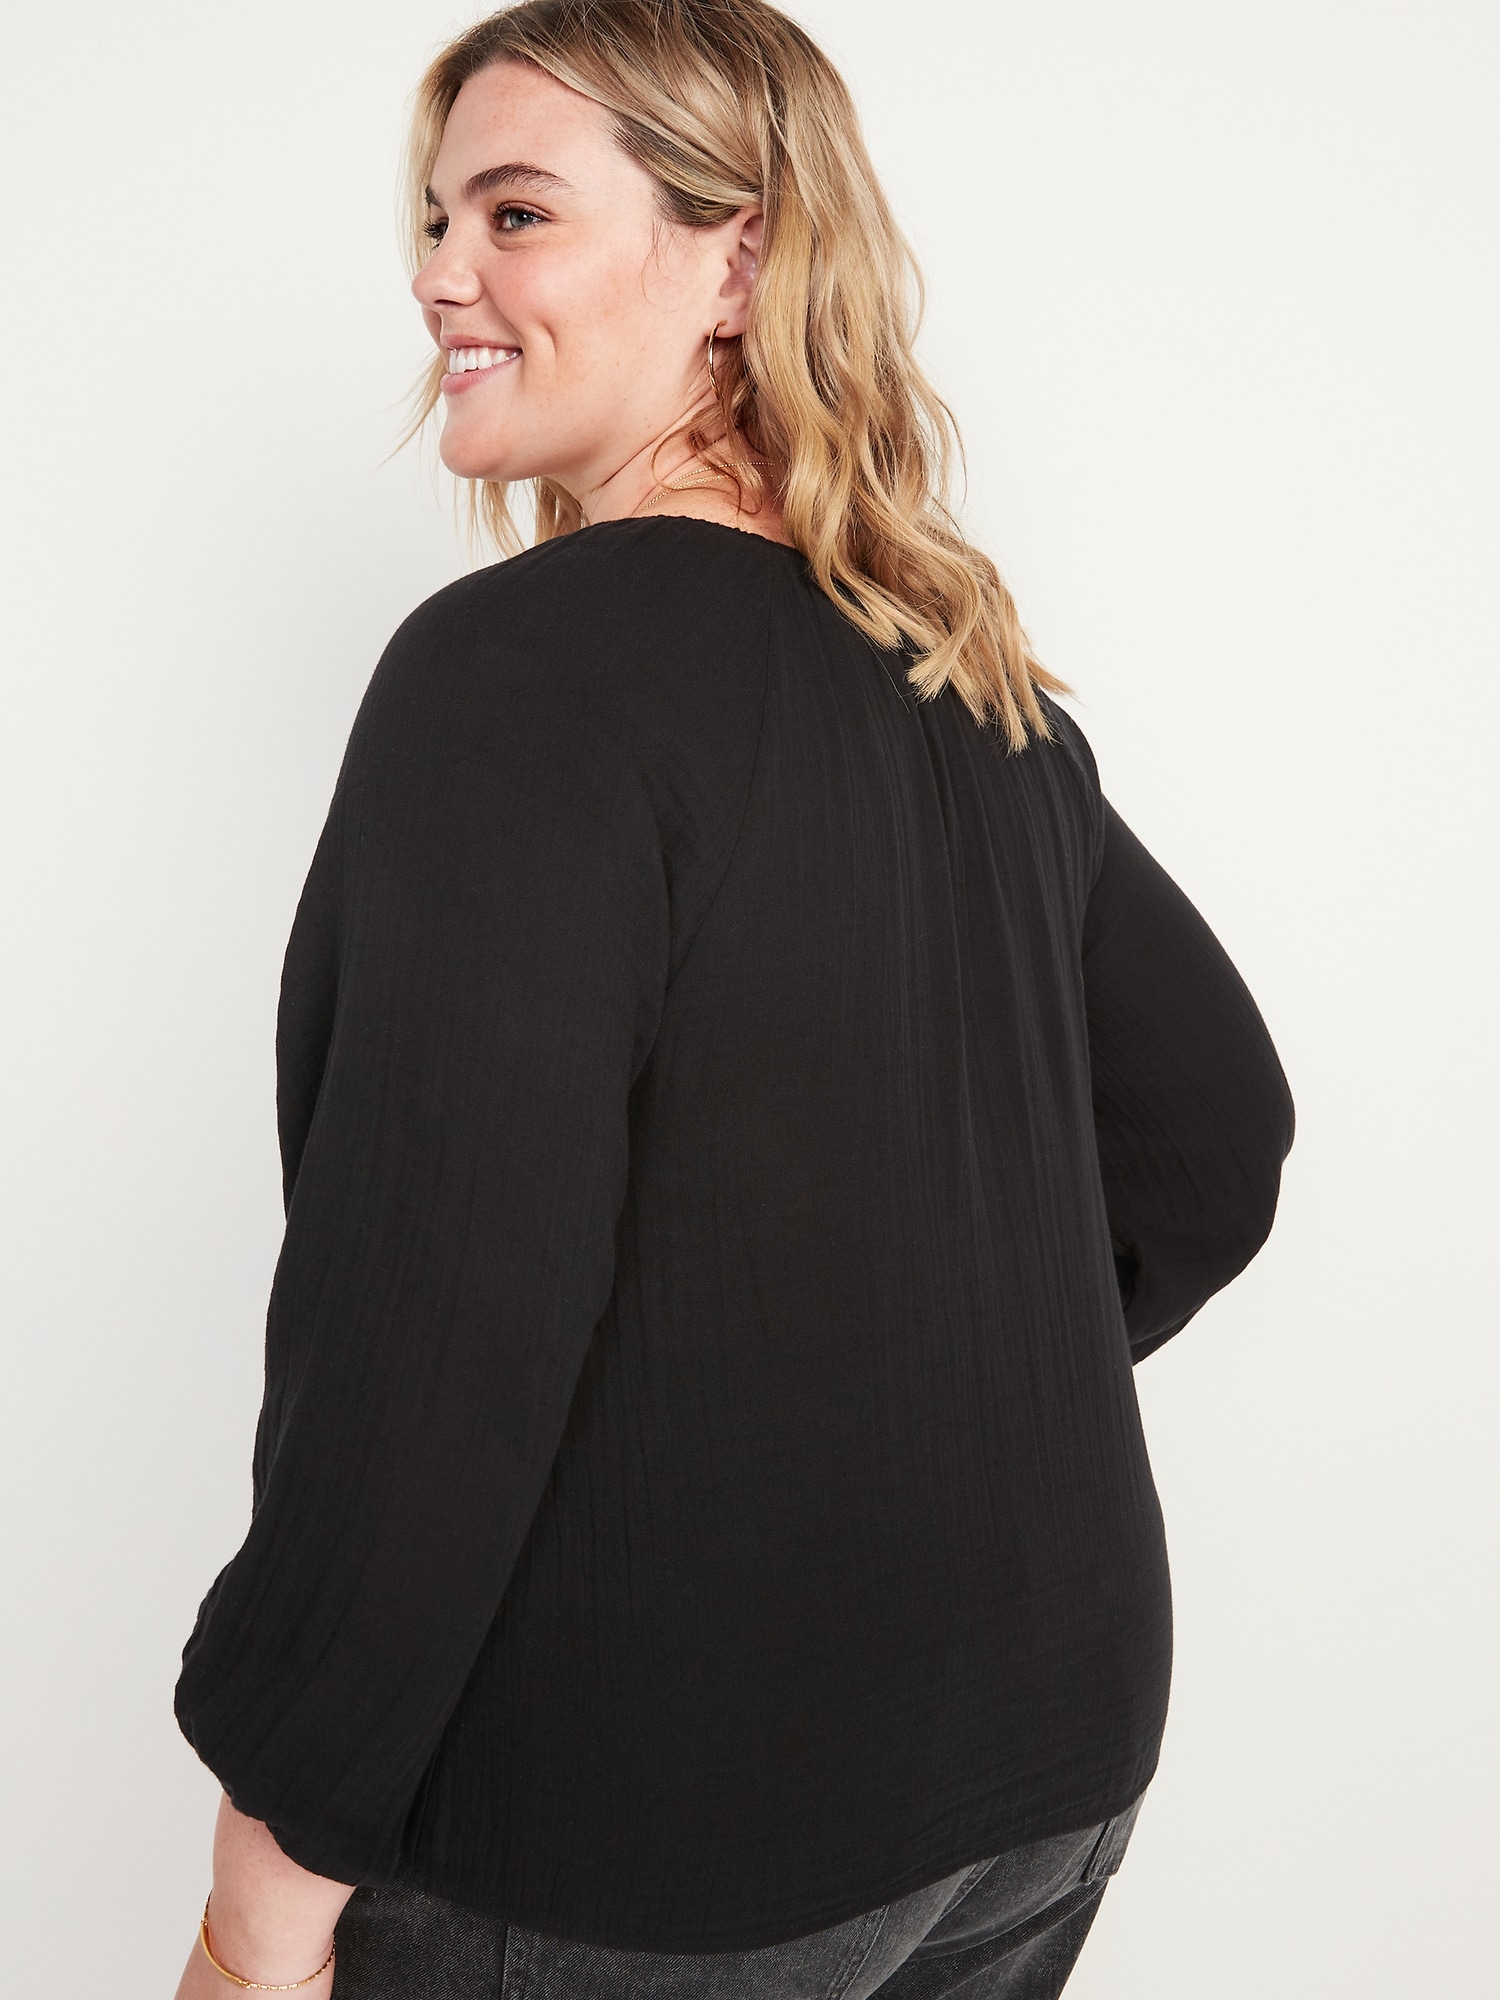 Shirred Double-Weave Blouse | Old Navy